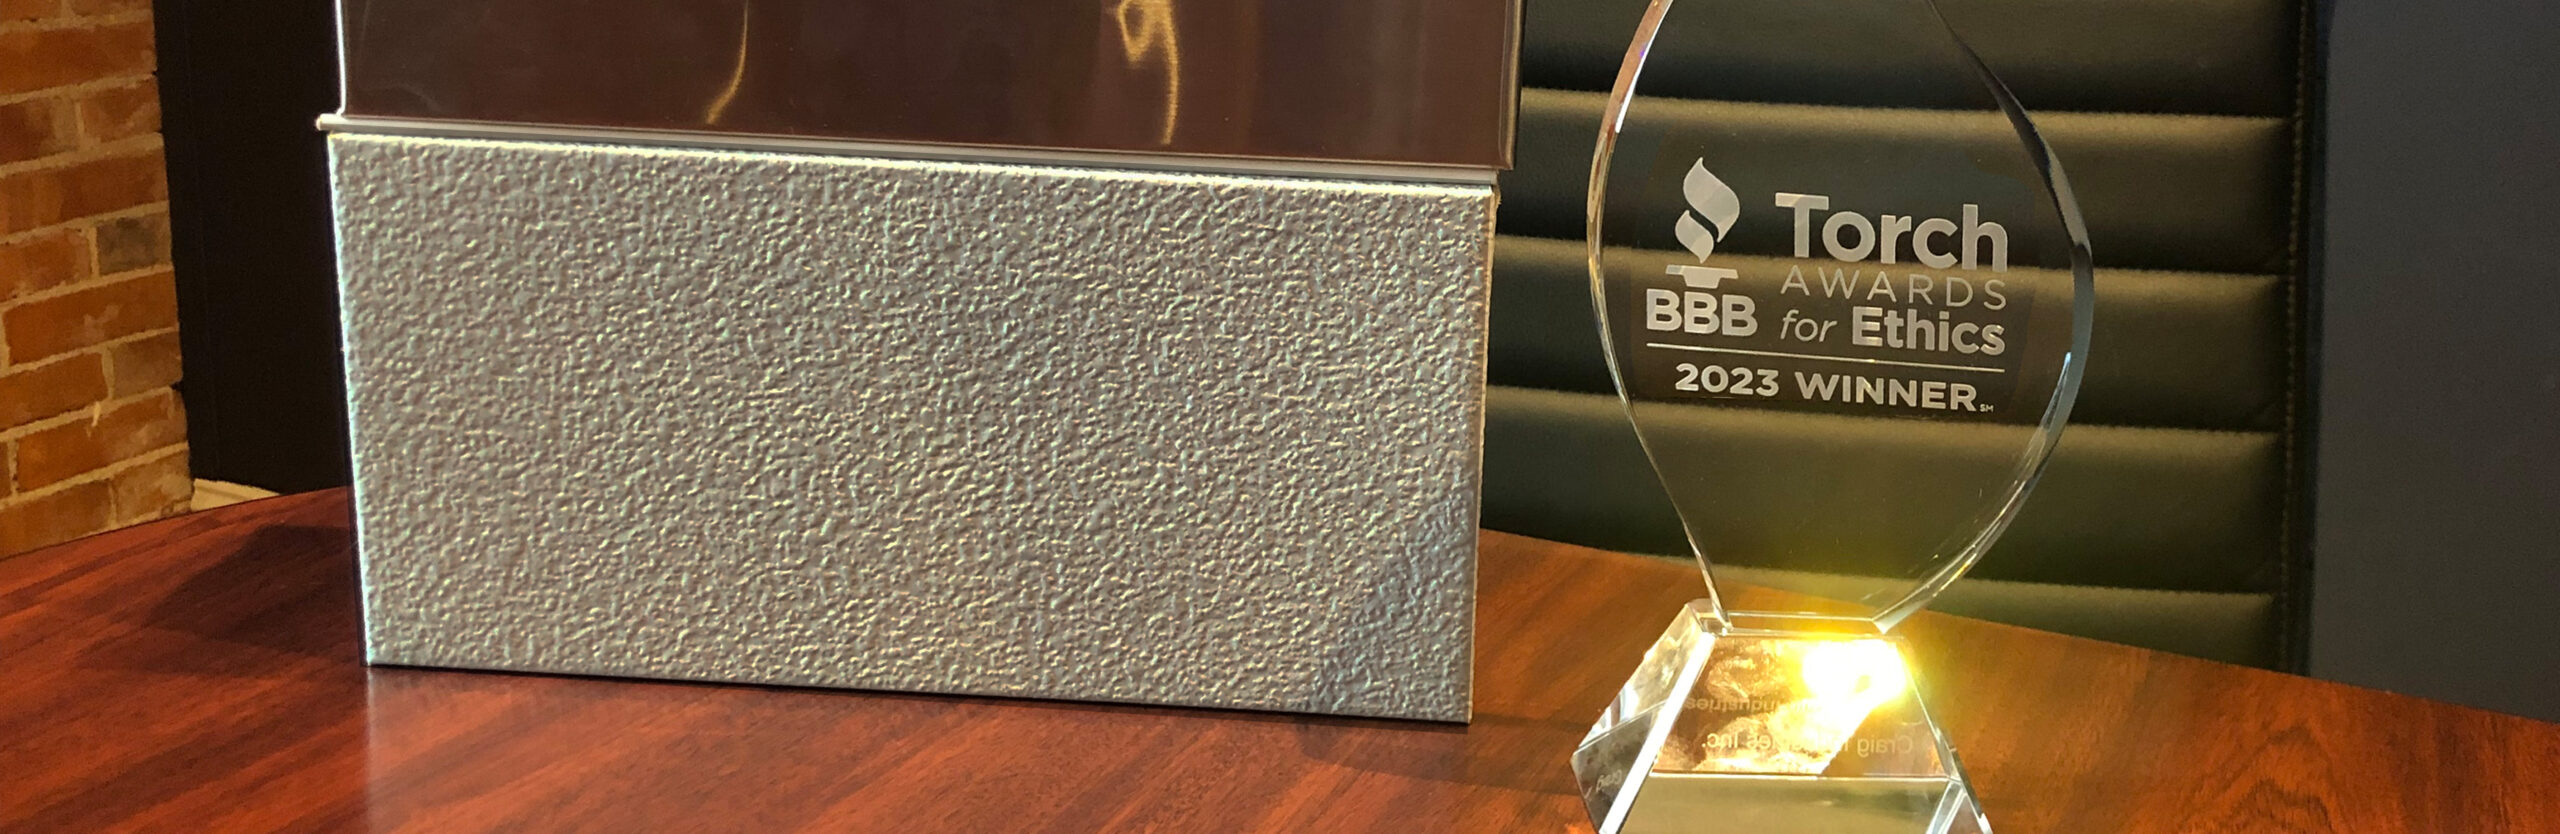 Craig Industries Honored with BBB Torch Award for Ethics